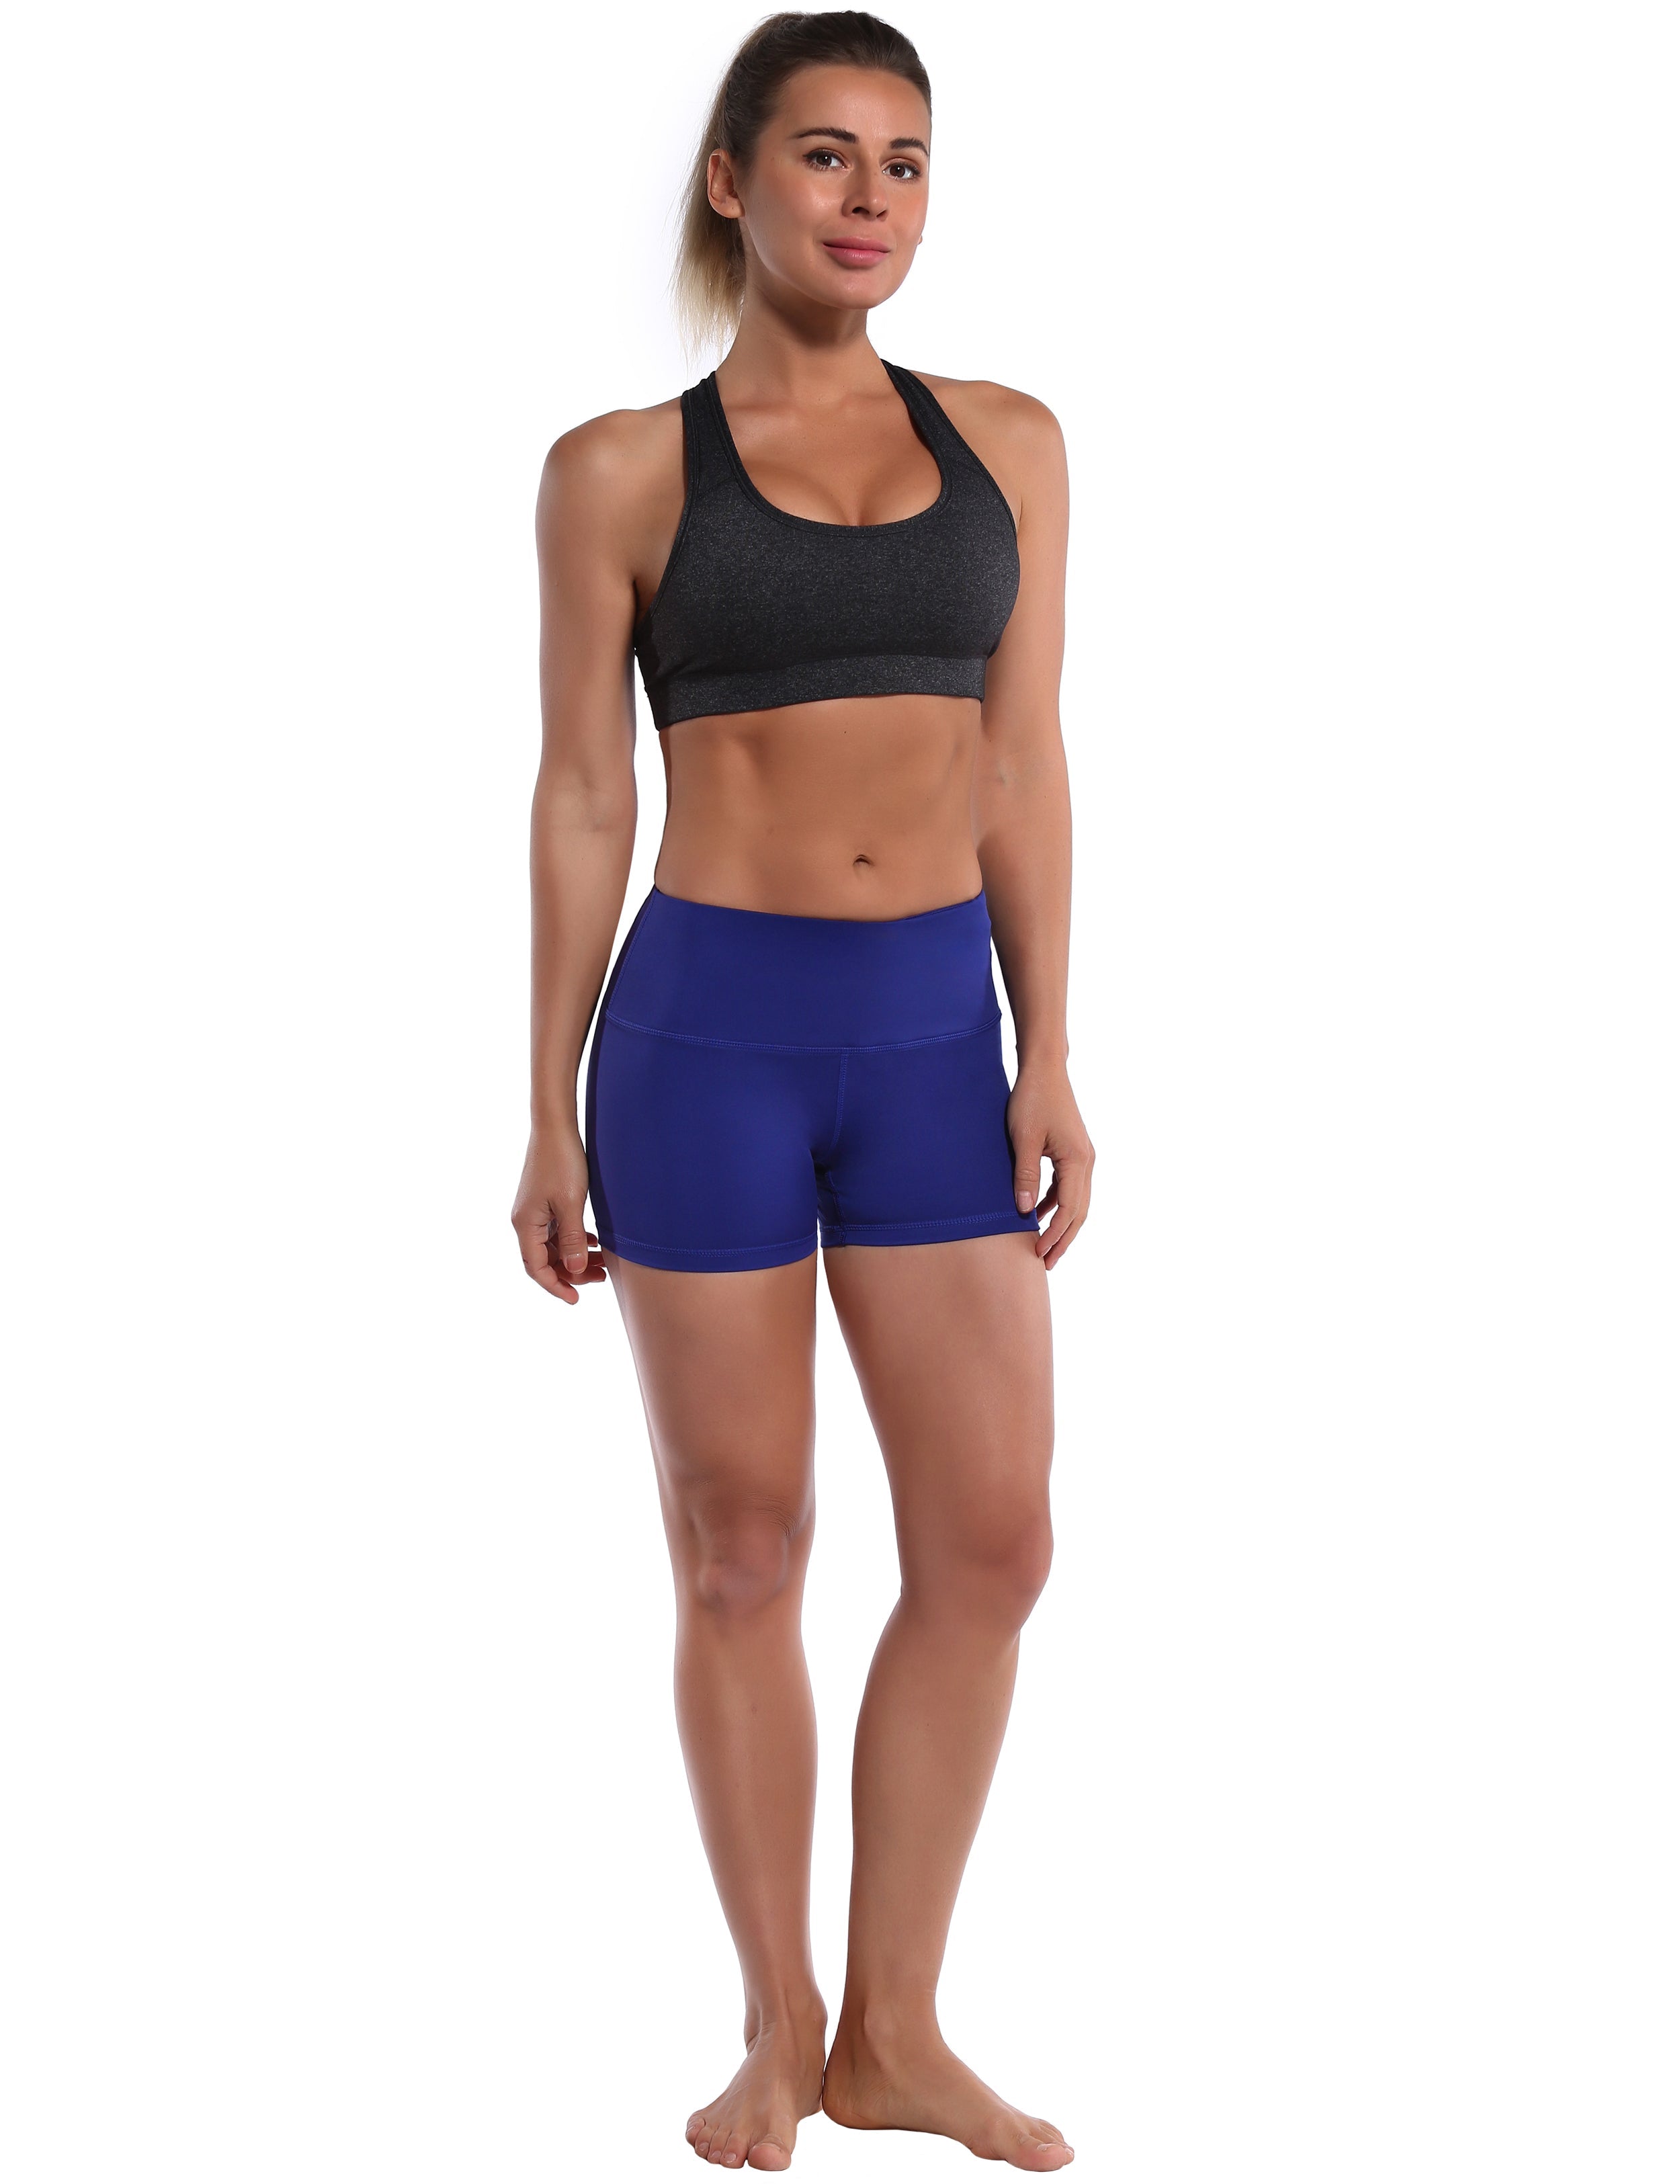 2.5" Pilates Shorts navy Softest-ever fabric High elasticity High density 4-way stretch Fabric doesn't attract lint easily No see-through Moisture-wicking Machine wash 75% Nylon, 25% Spandex